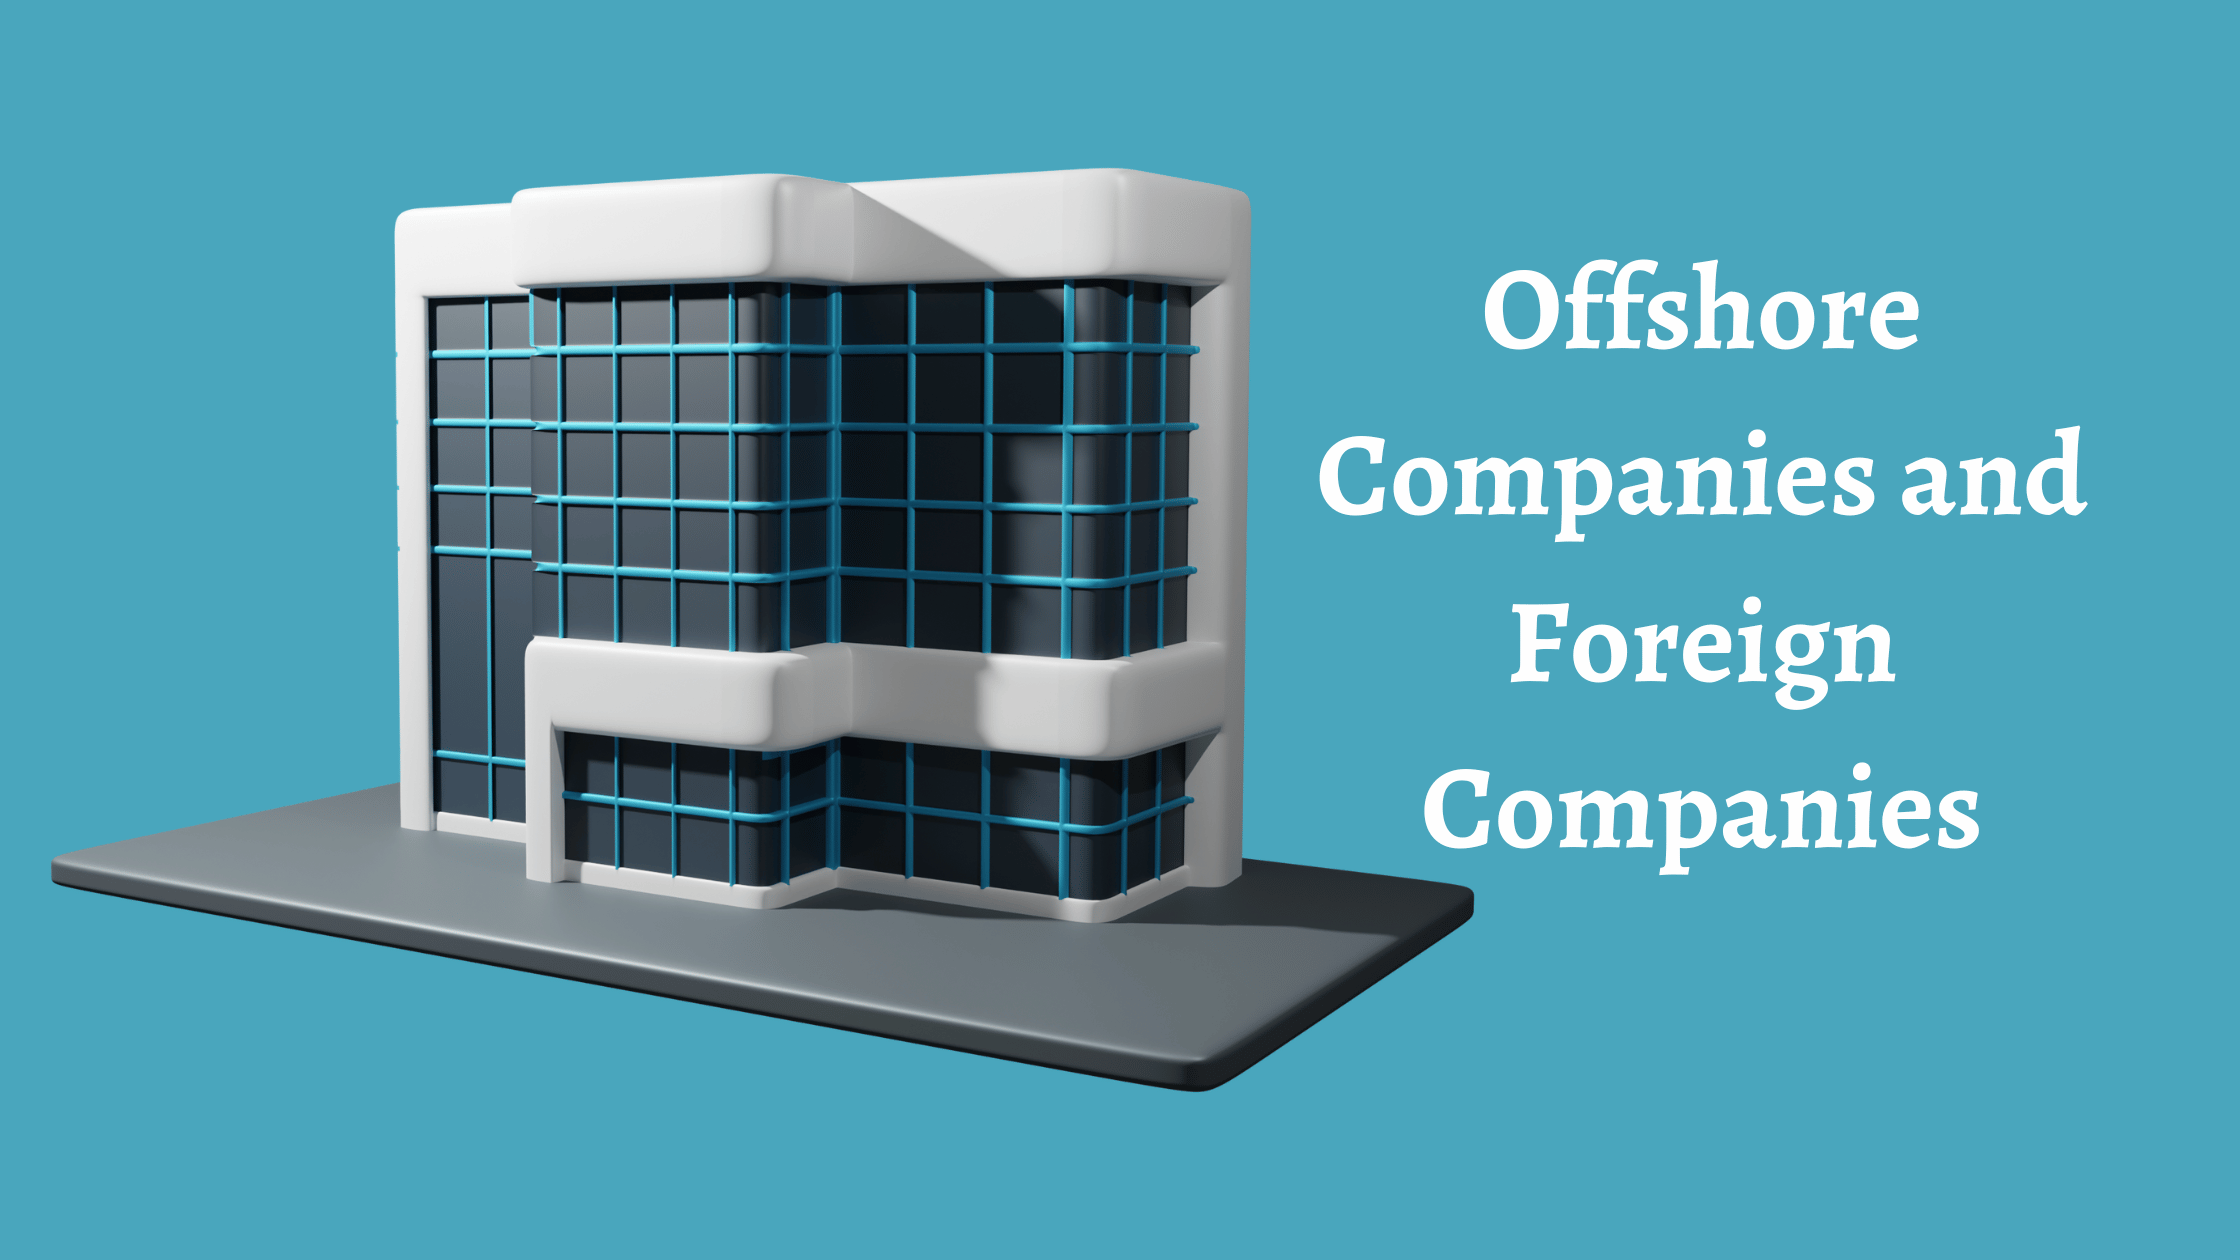 Offshore Companies and Foreign Companies